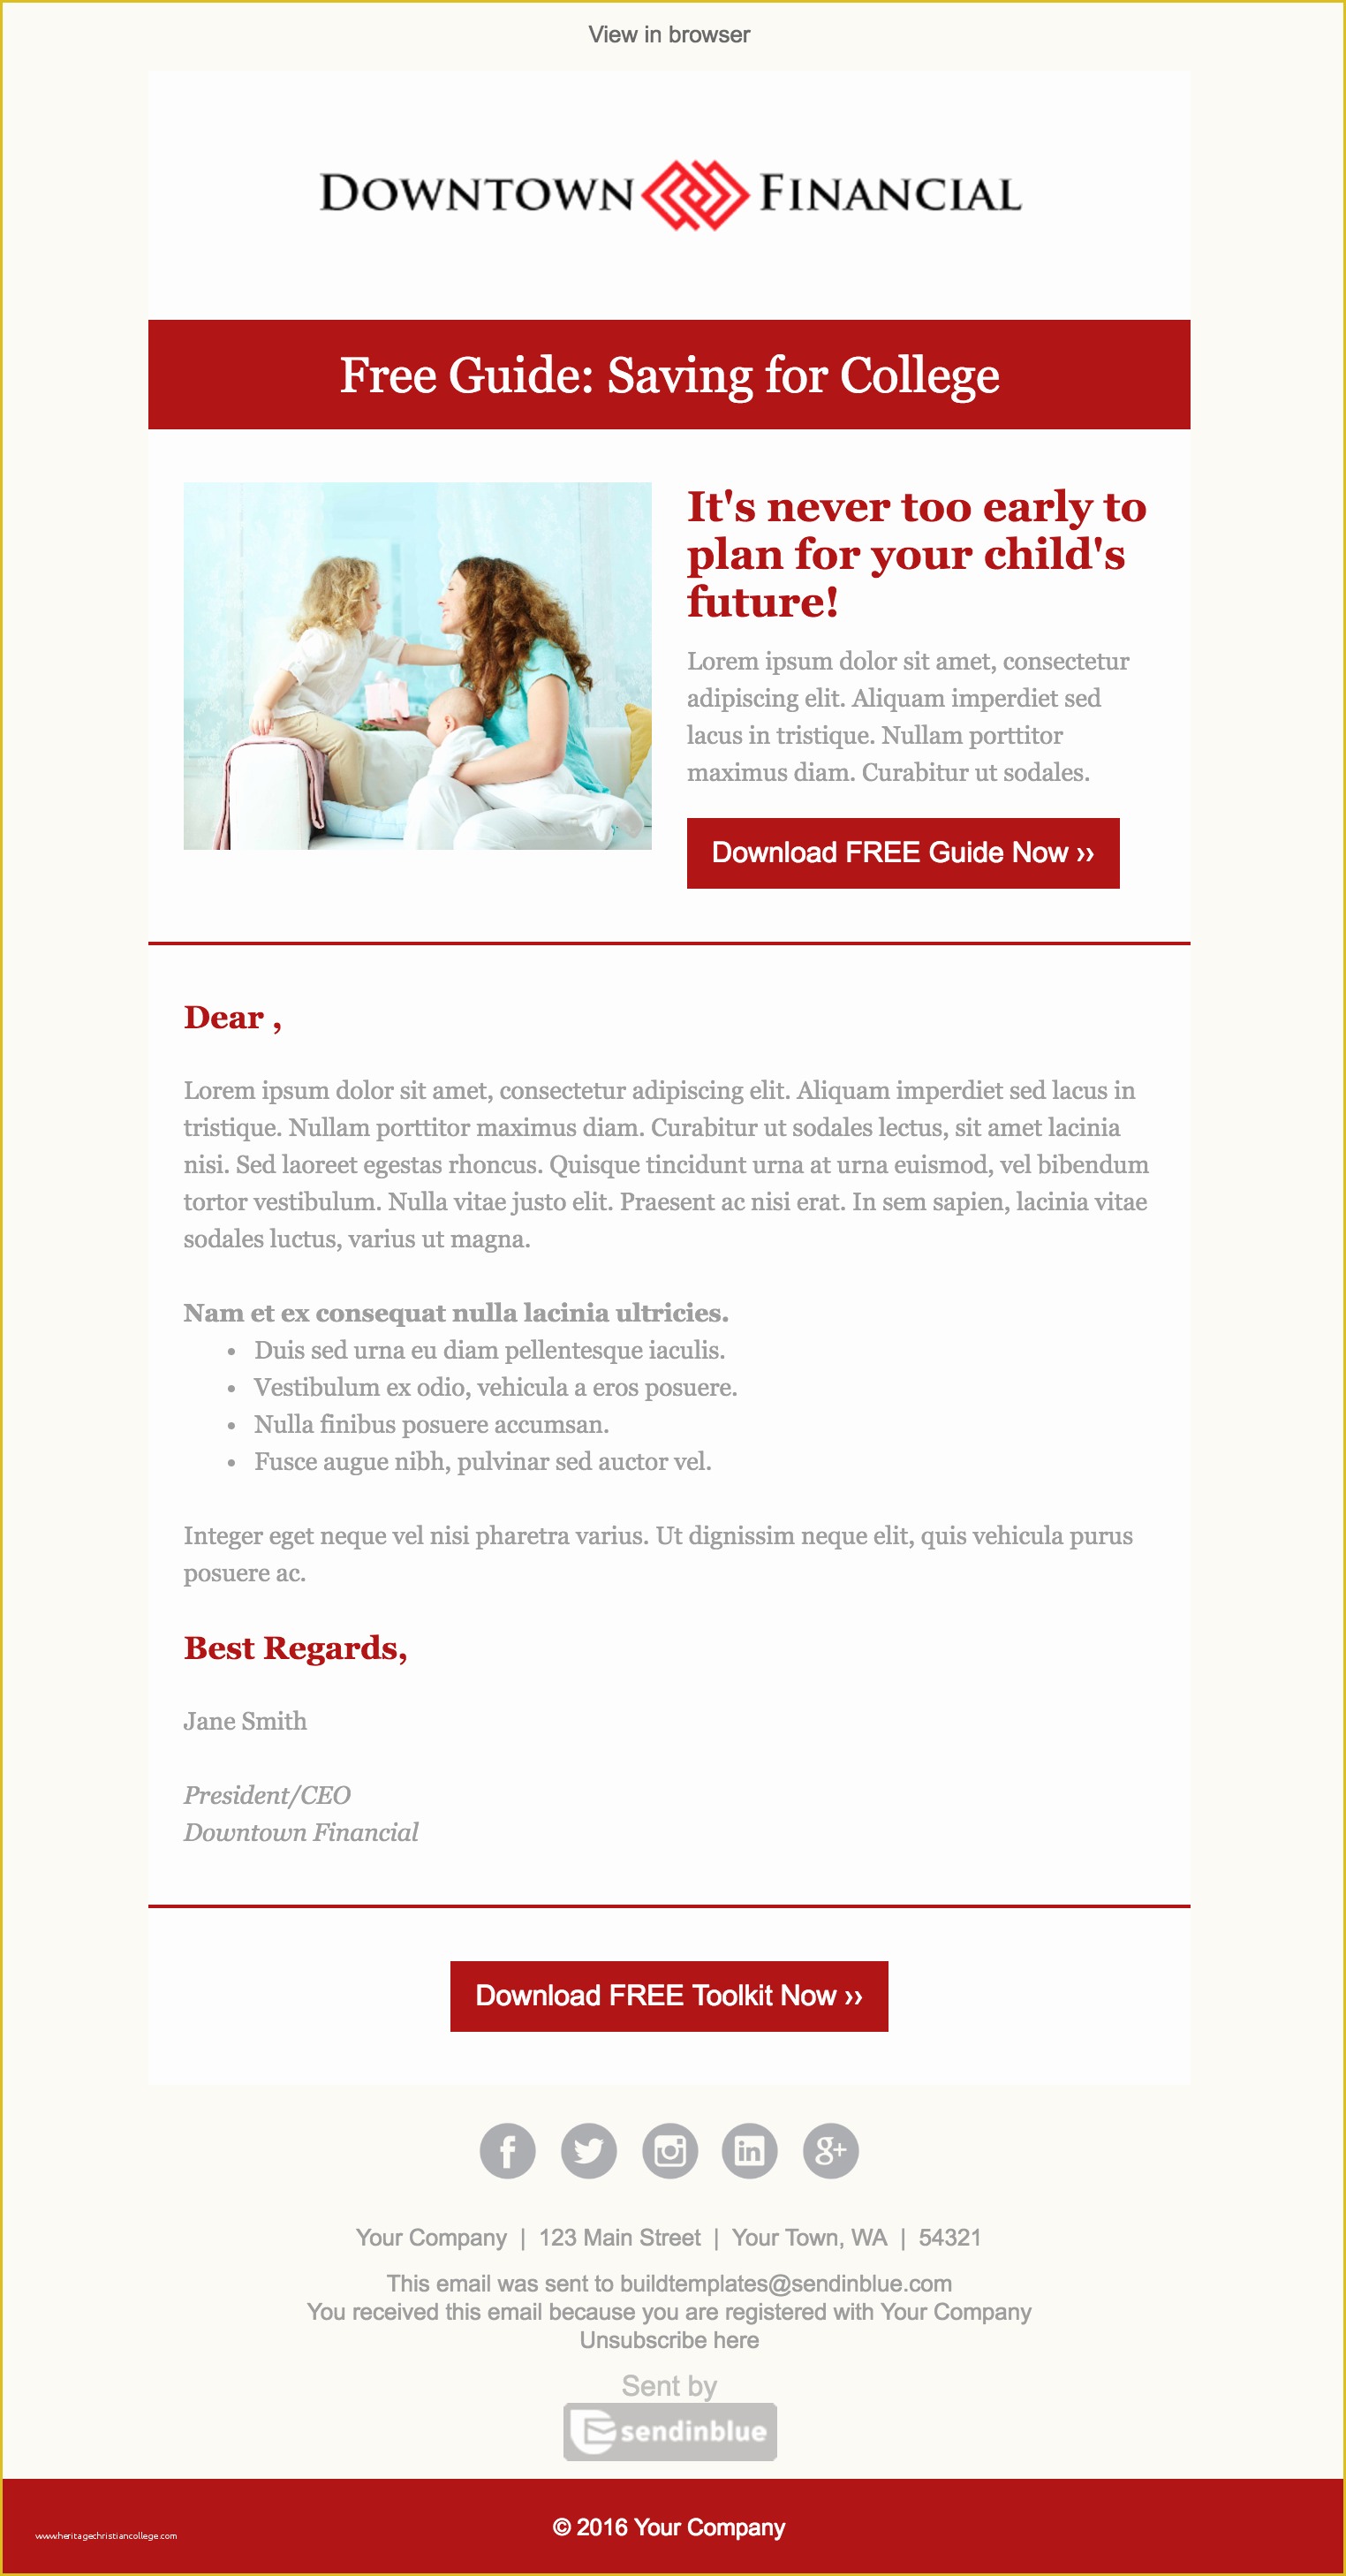 Free Email Announcement Template Of top 8 B2b Email Templates for Marketers In 2017